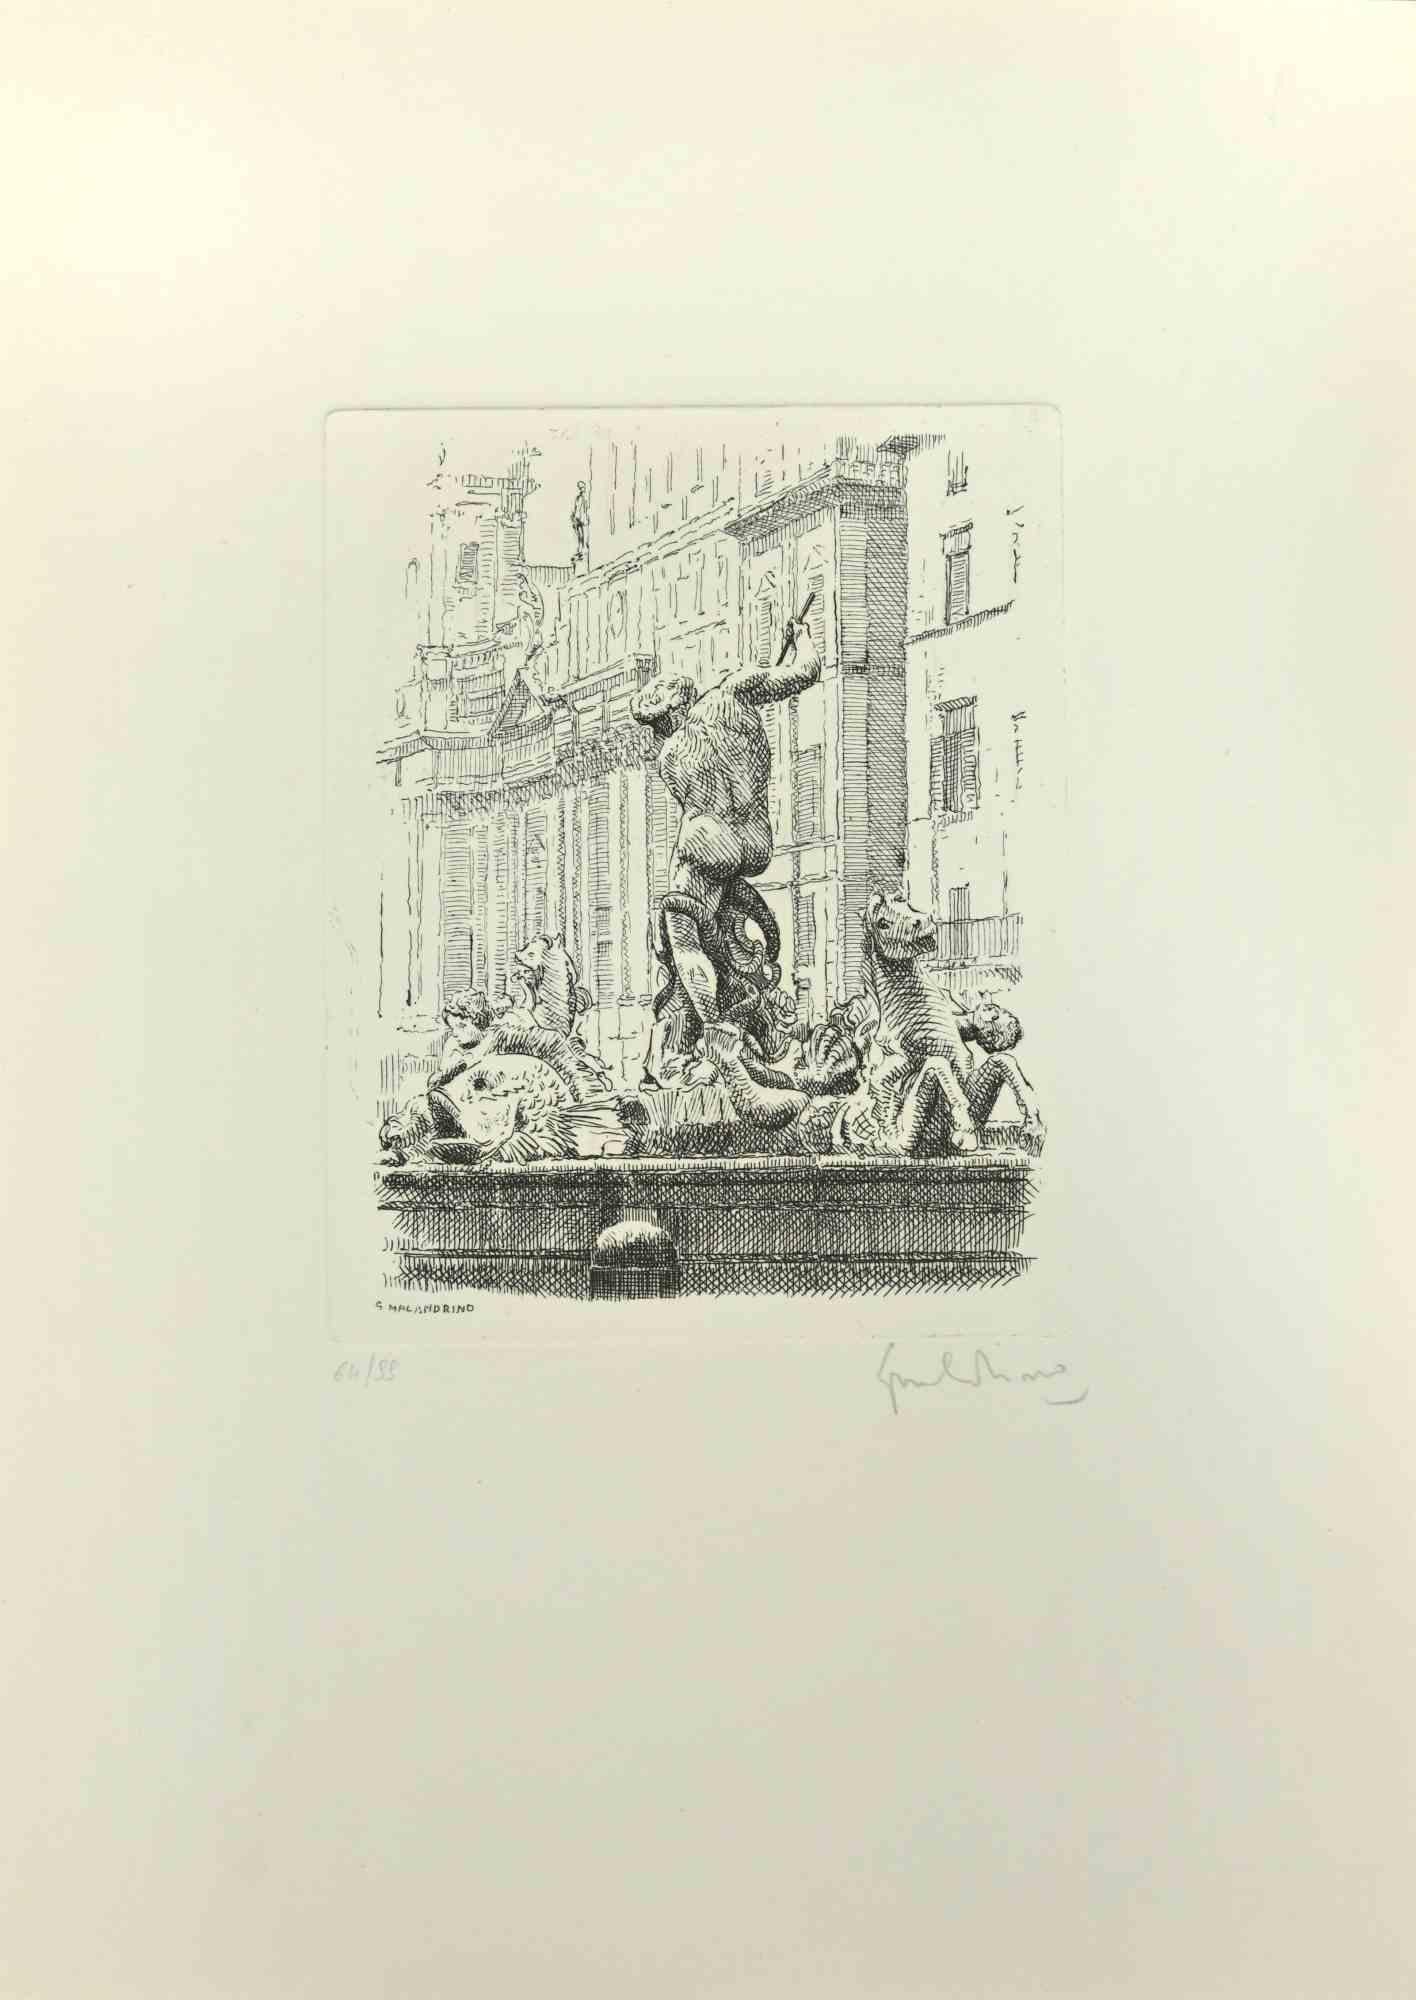 Navona Square is an artwork realized by Giuseppe Malandrino.

Print in etching technique.

Hand-signed by the artist in pencil on the lower right corner.

Numbered edition of 55 copies.

Good condition. 

This artwork represents the beautiful roman